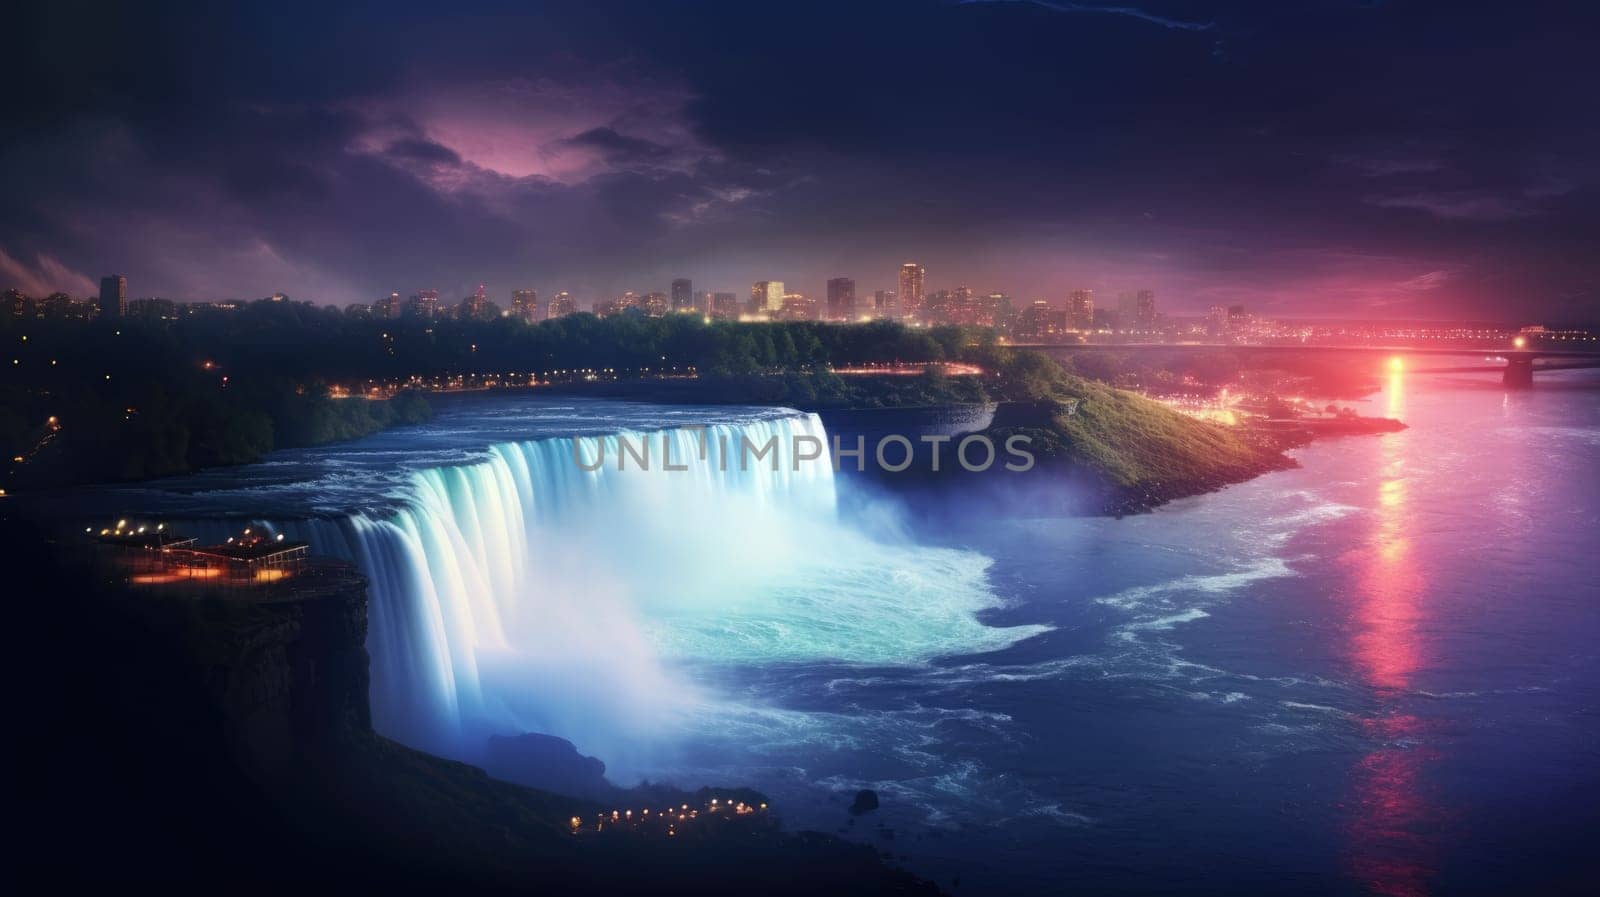 A stunning long exposure shot of Niagara Falls at night, glowing in blue, green, and pink hues. The falls cascade smoothly under a dark sky, with a softly lit bridge in the distance.